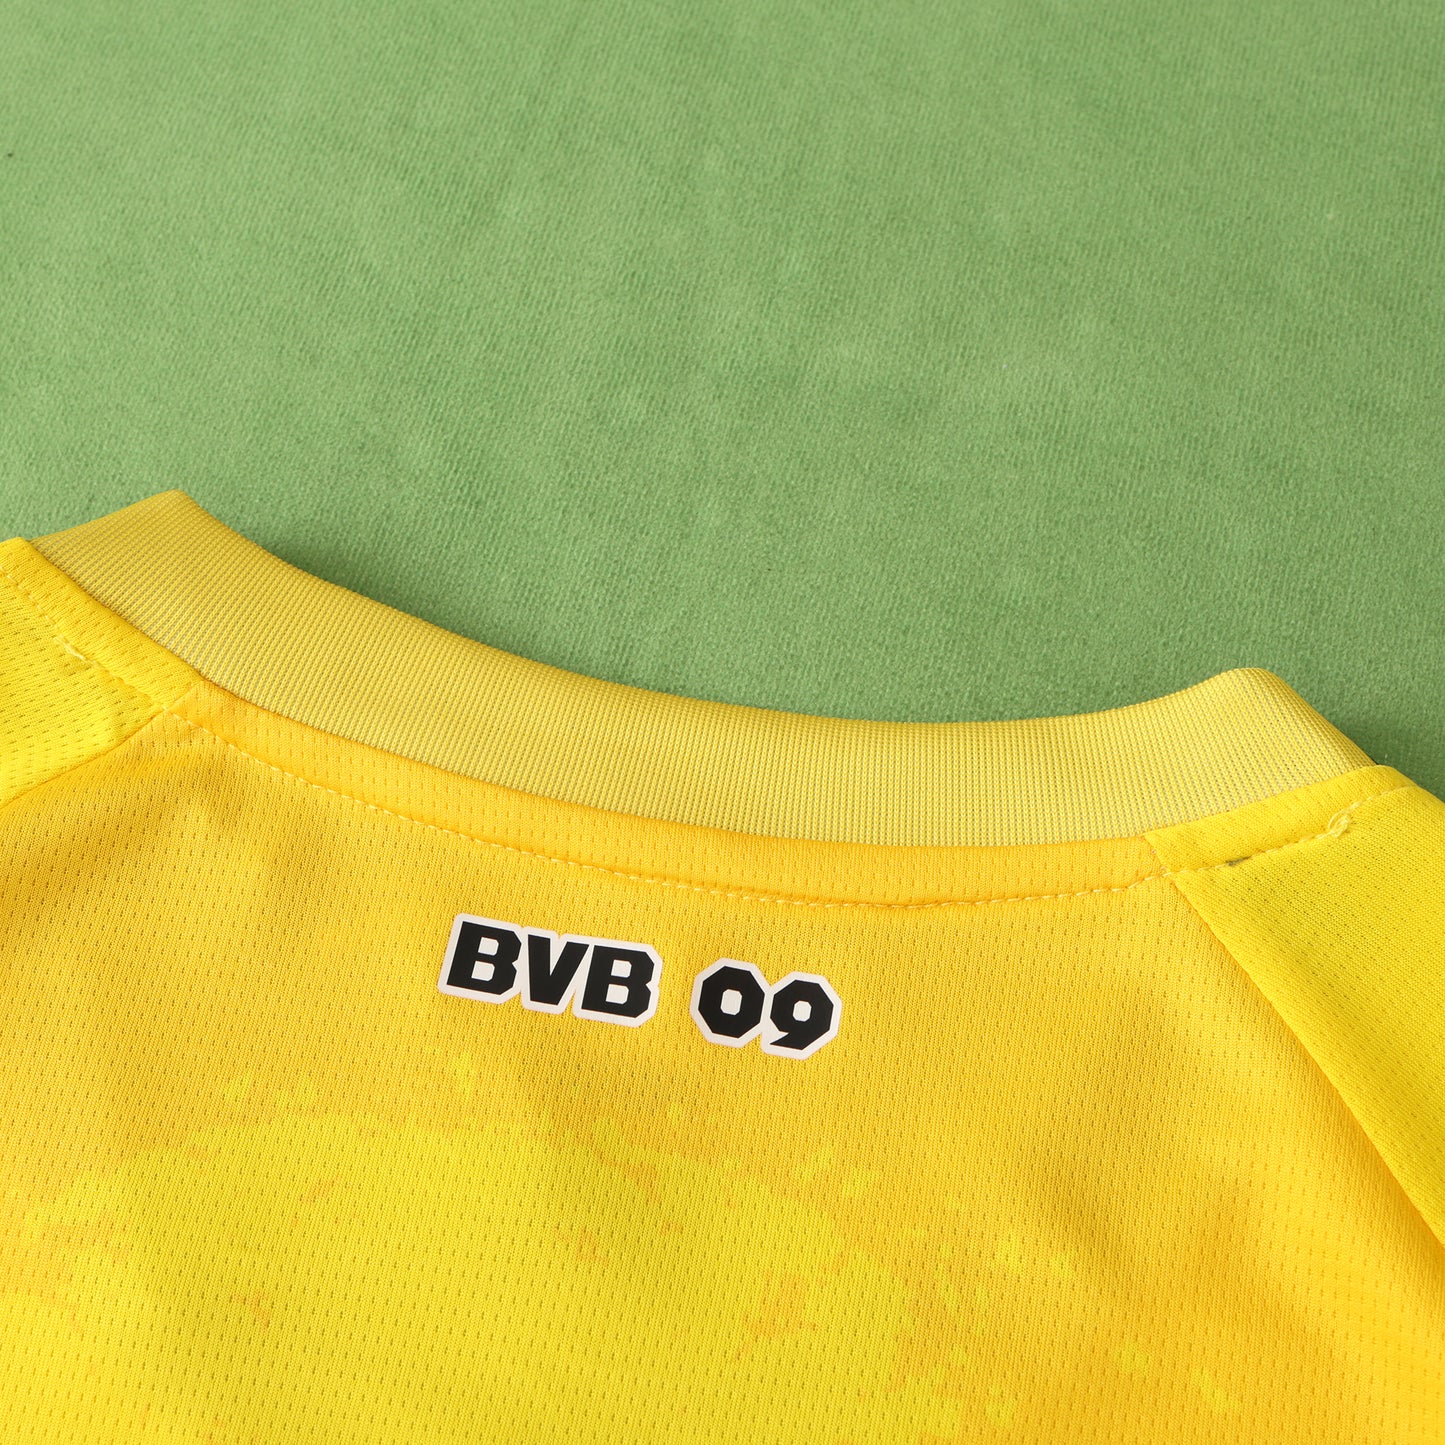 24-25 Dortmund Yellow Special Football Jersey Maillot Knitwear Maglia